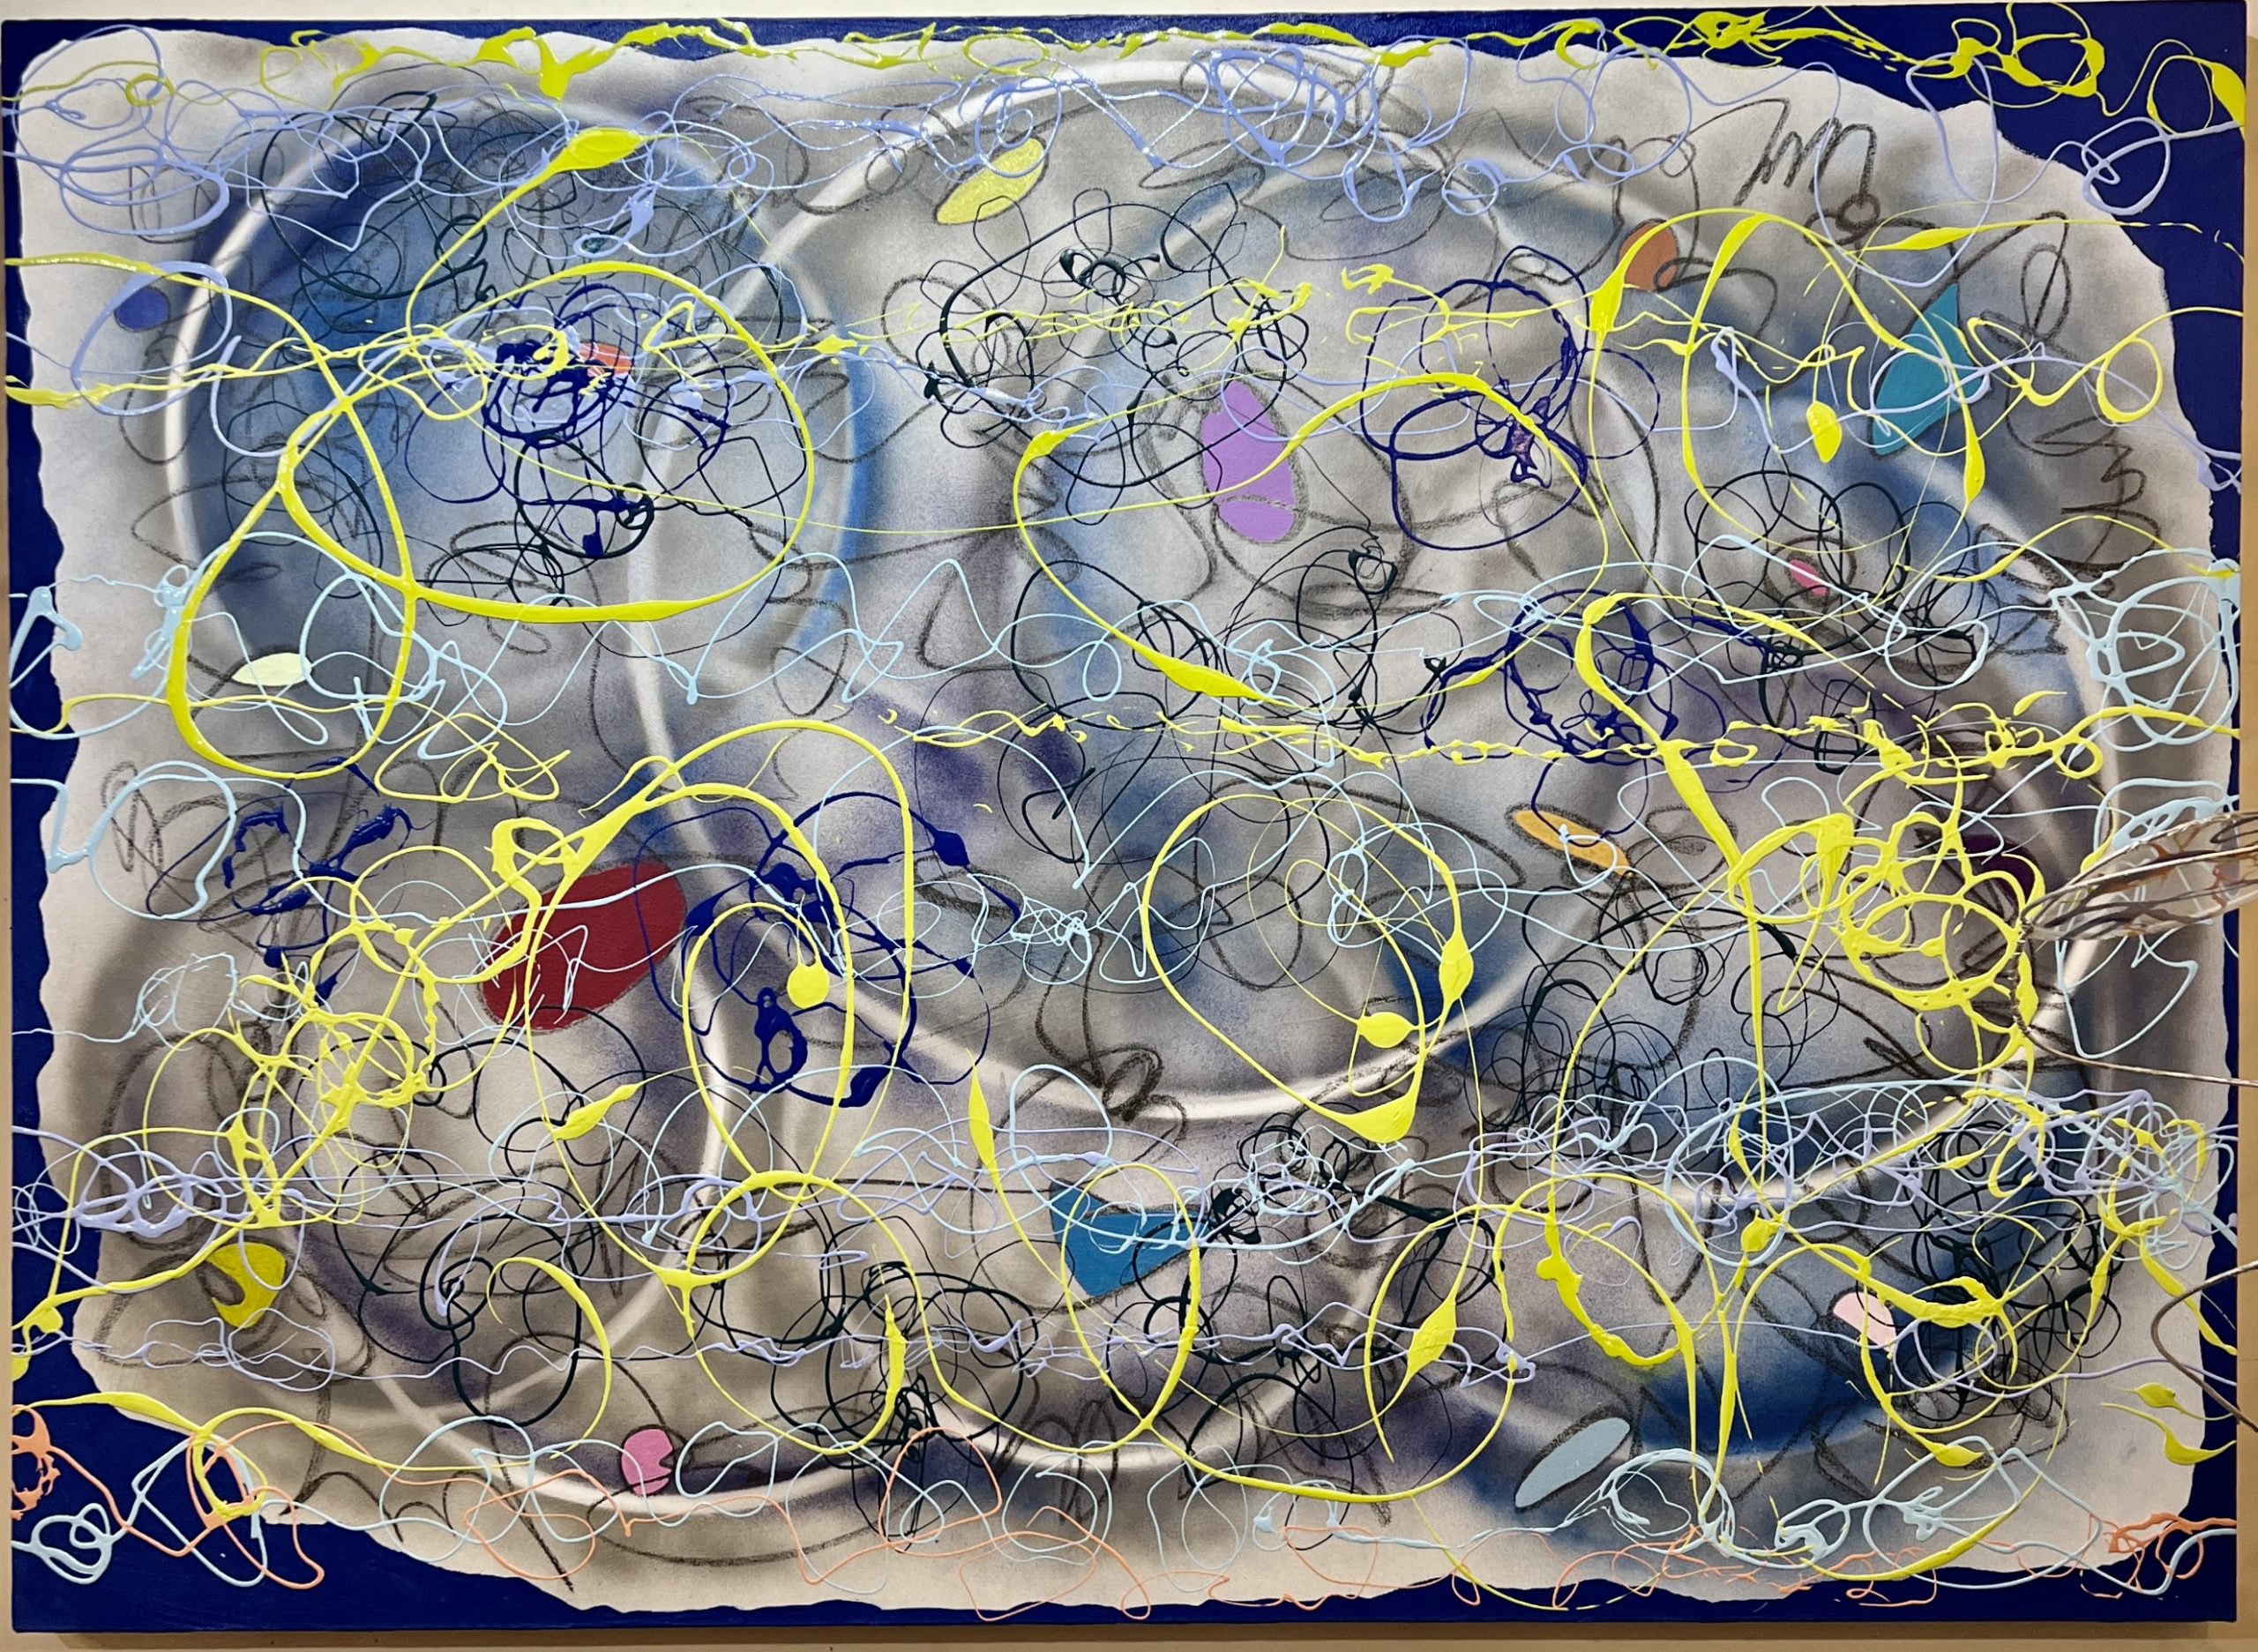 Celestial Jazz 2022 Enamel paint with collaged elements 52 x 72 inches